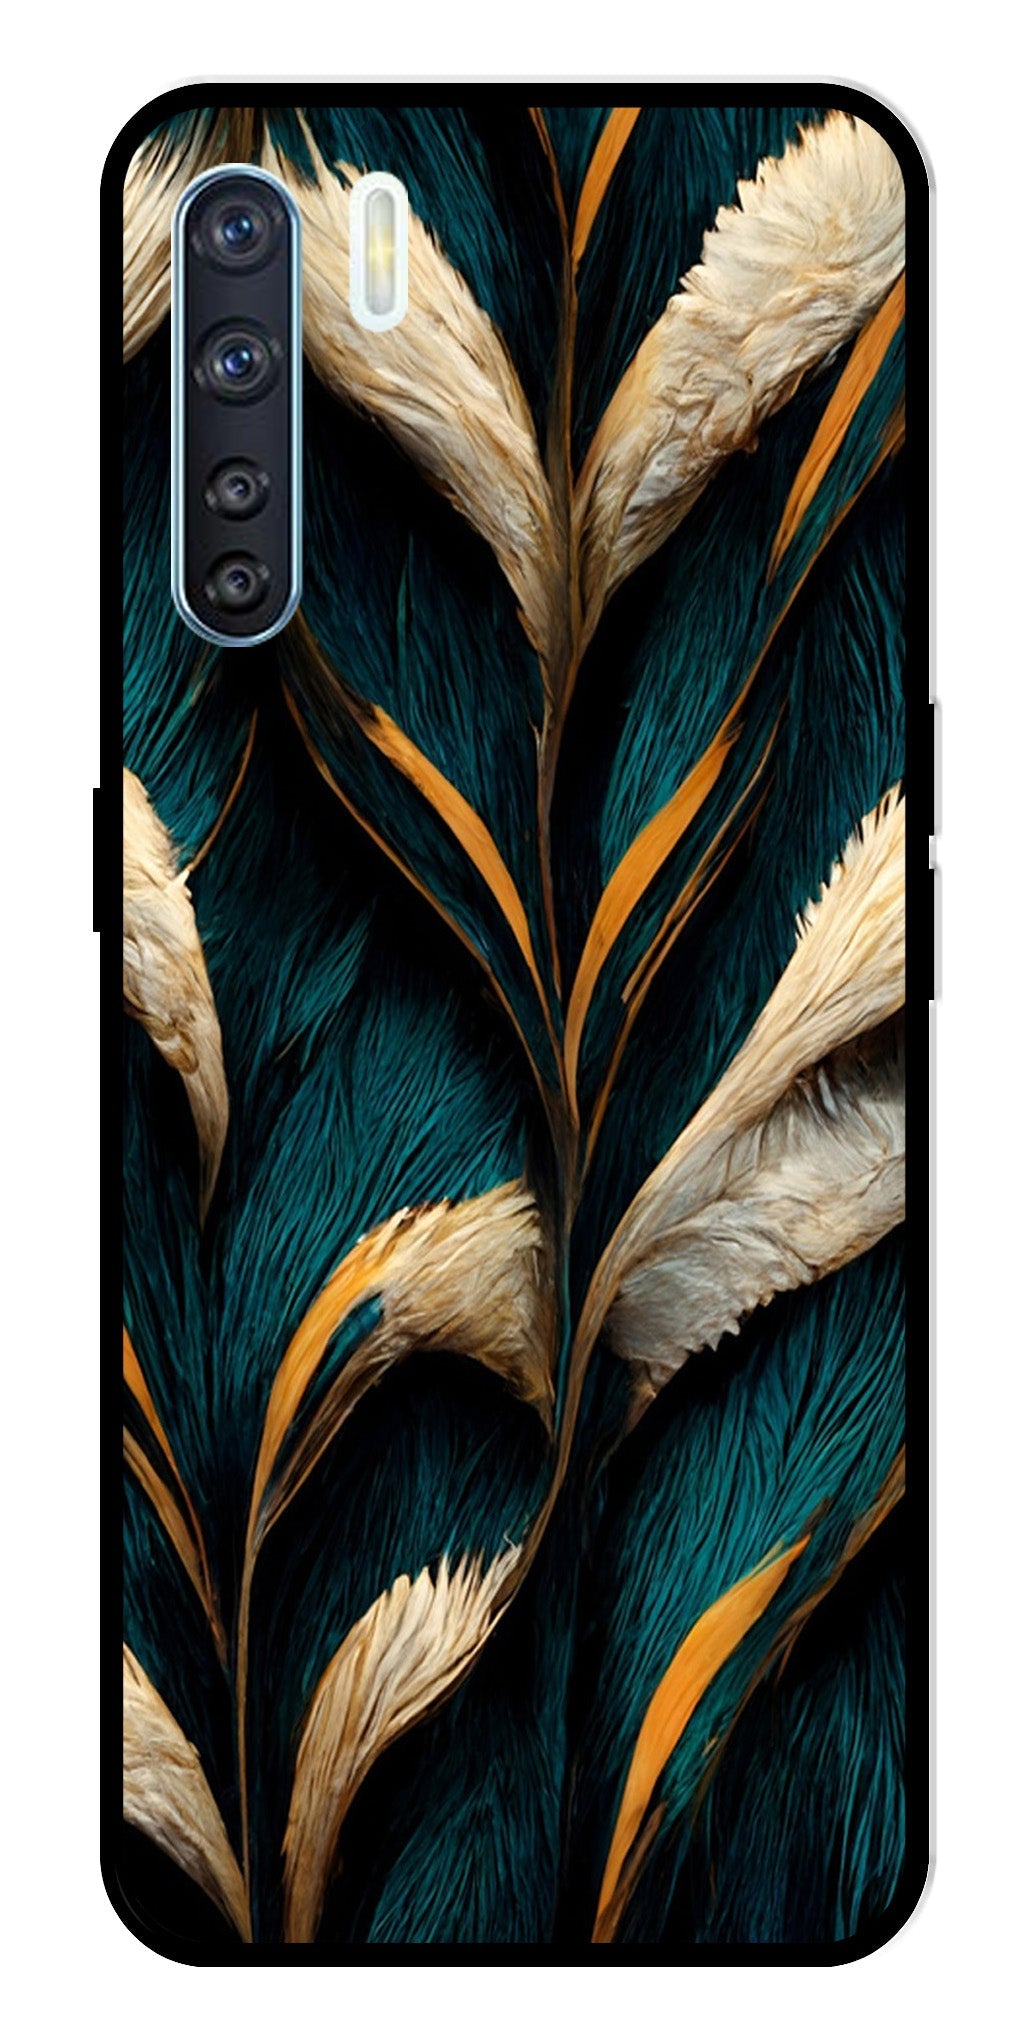 Feathers Metal Mobile Case for Oppo F15   (Design No -30)